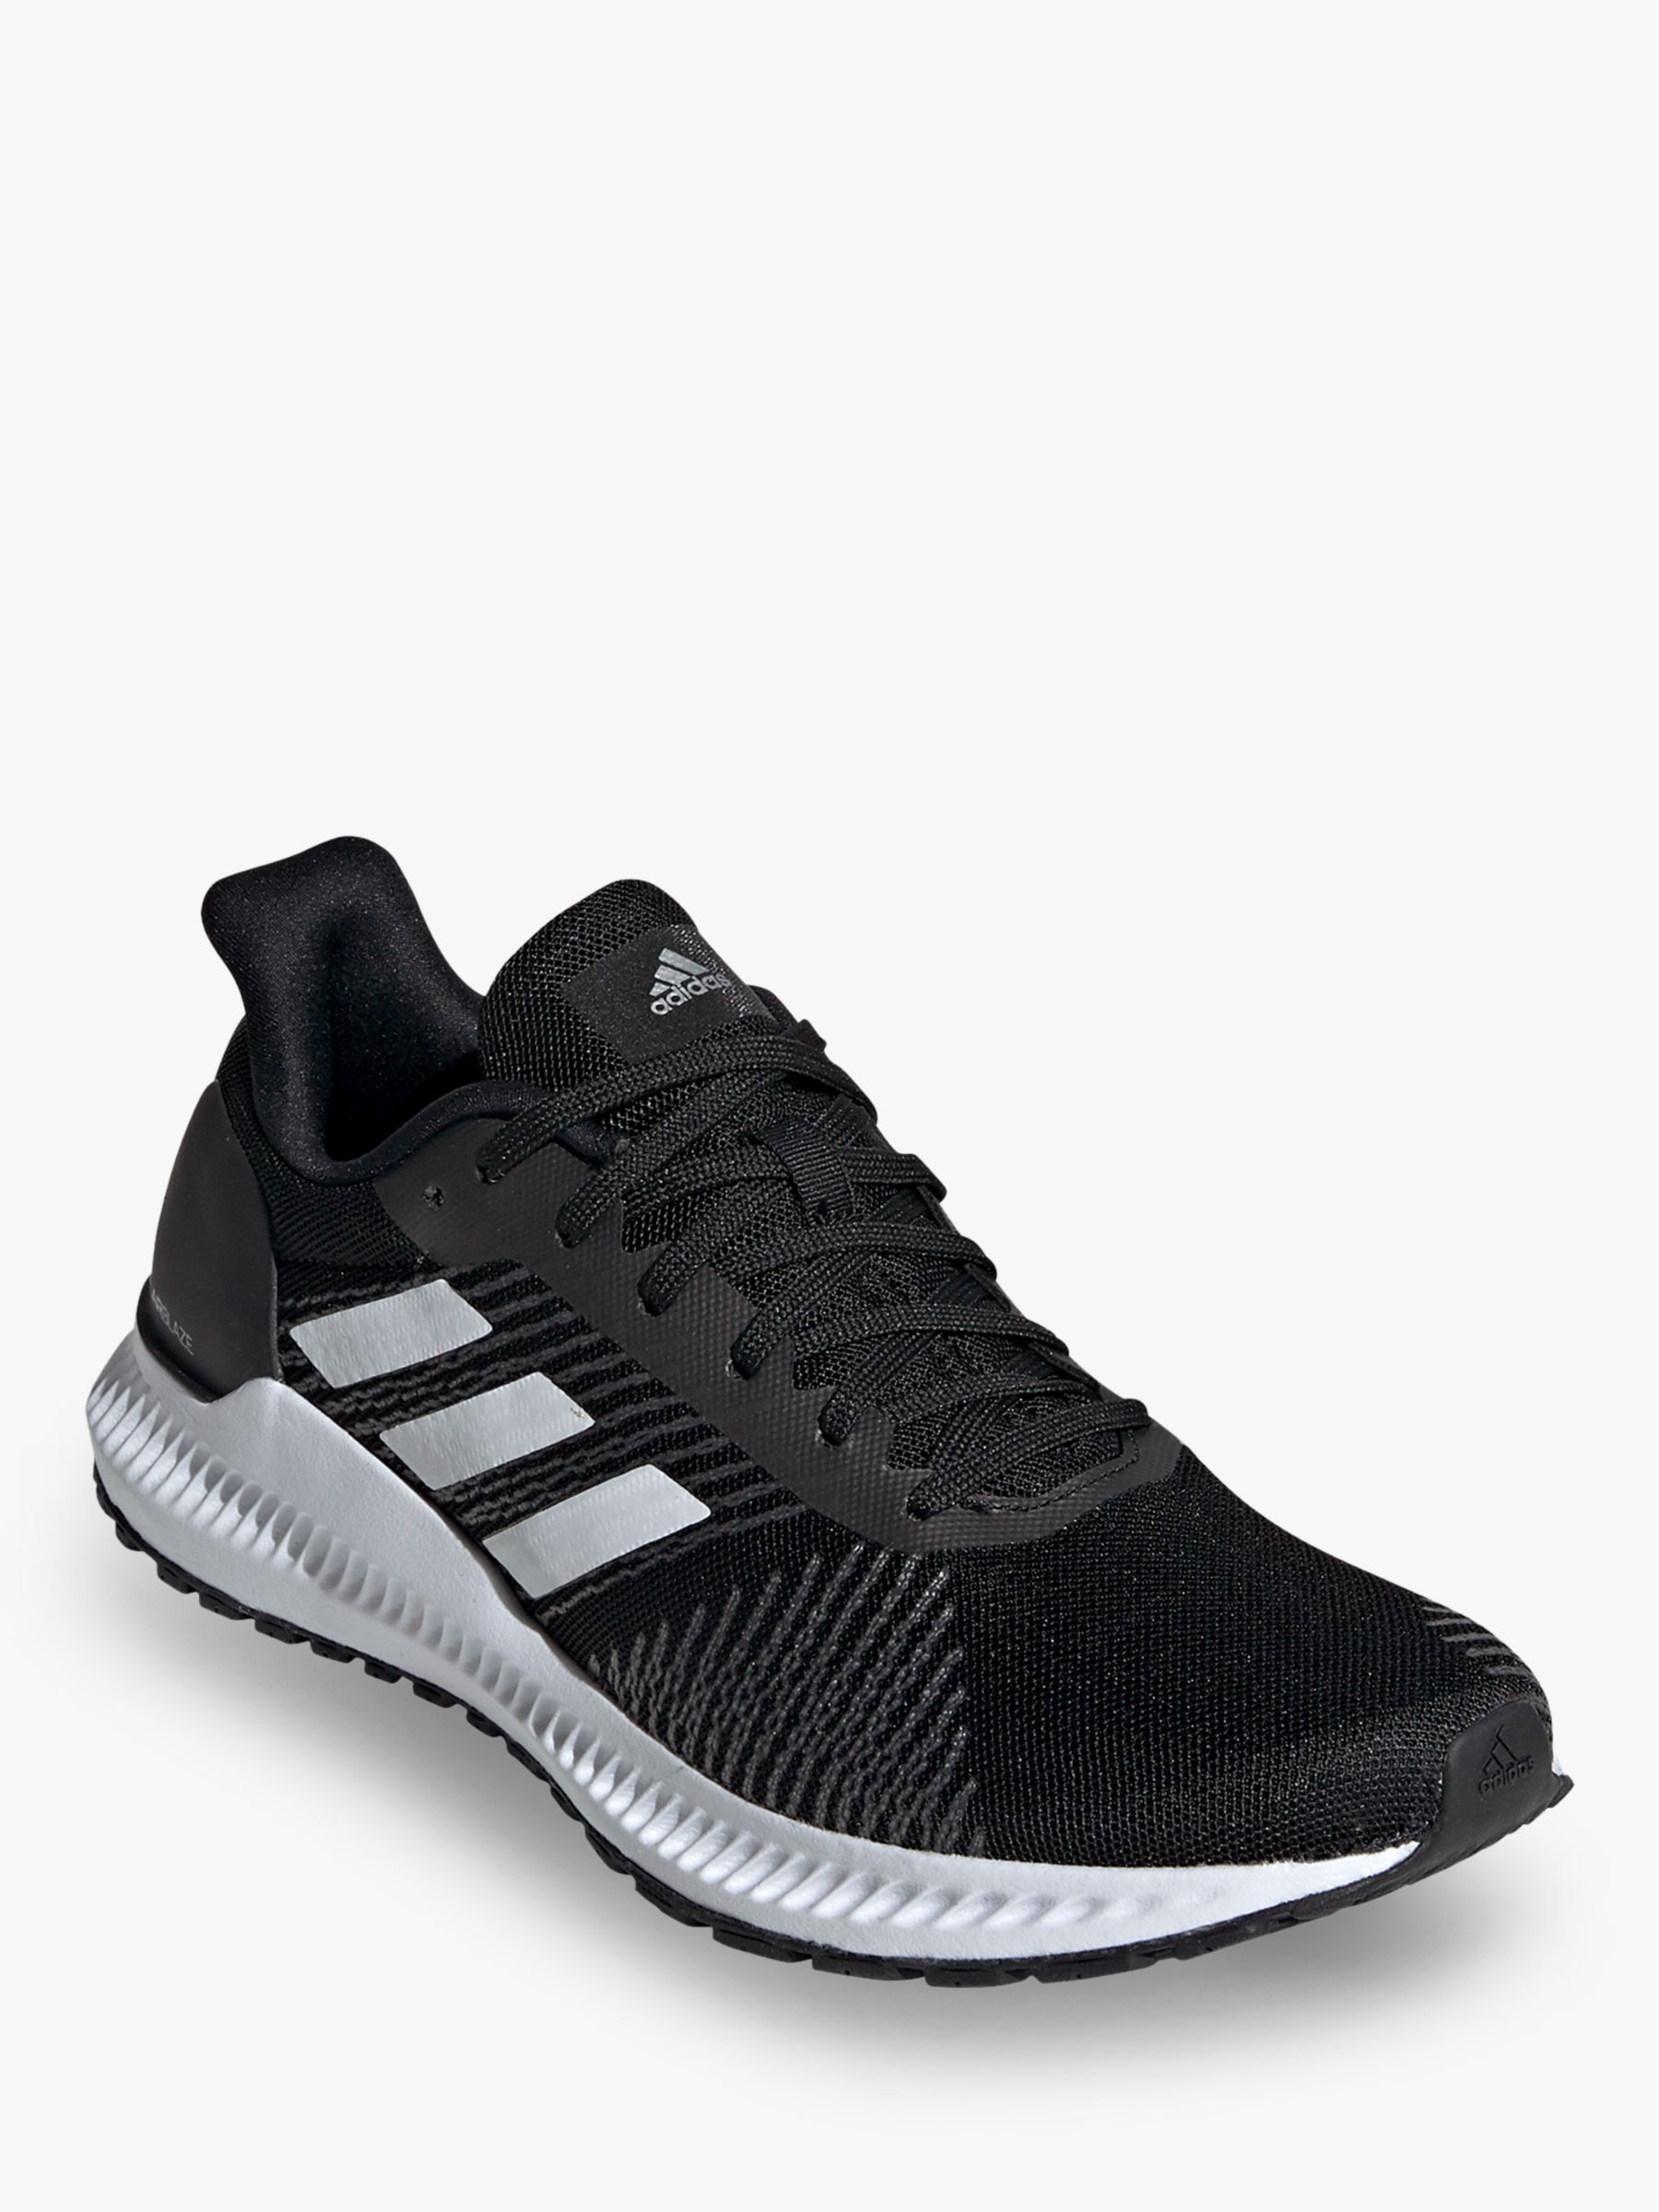 adidas womens running shoes black and white